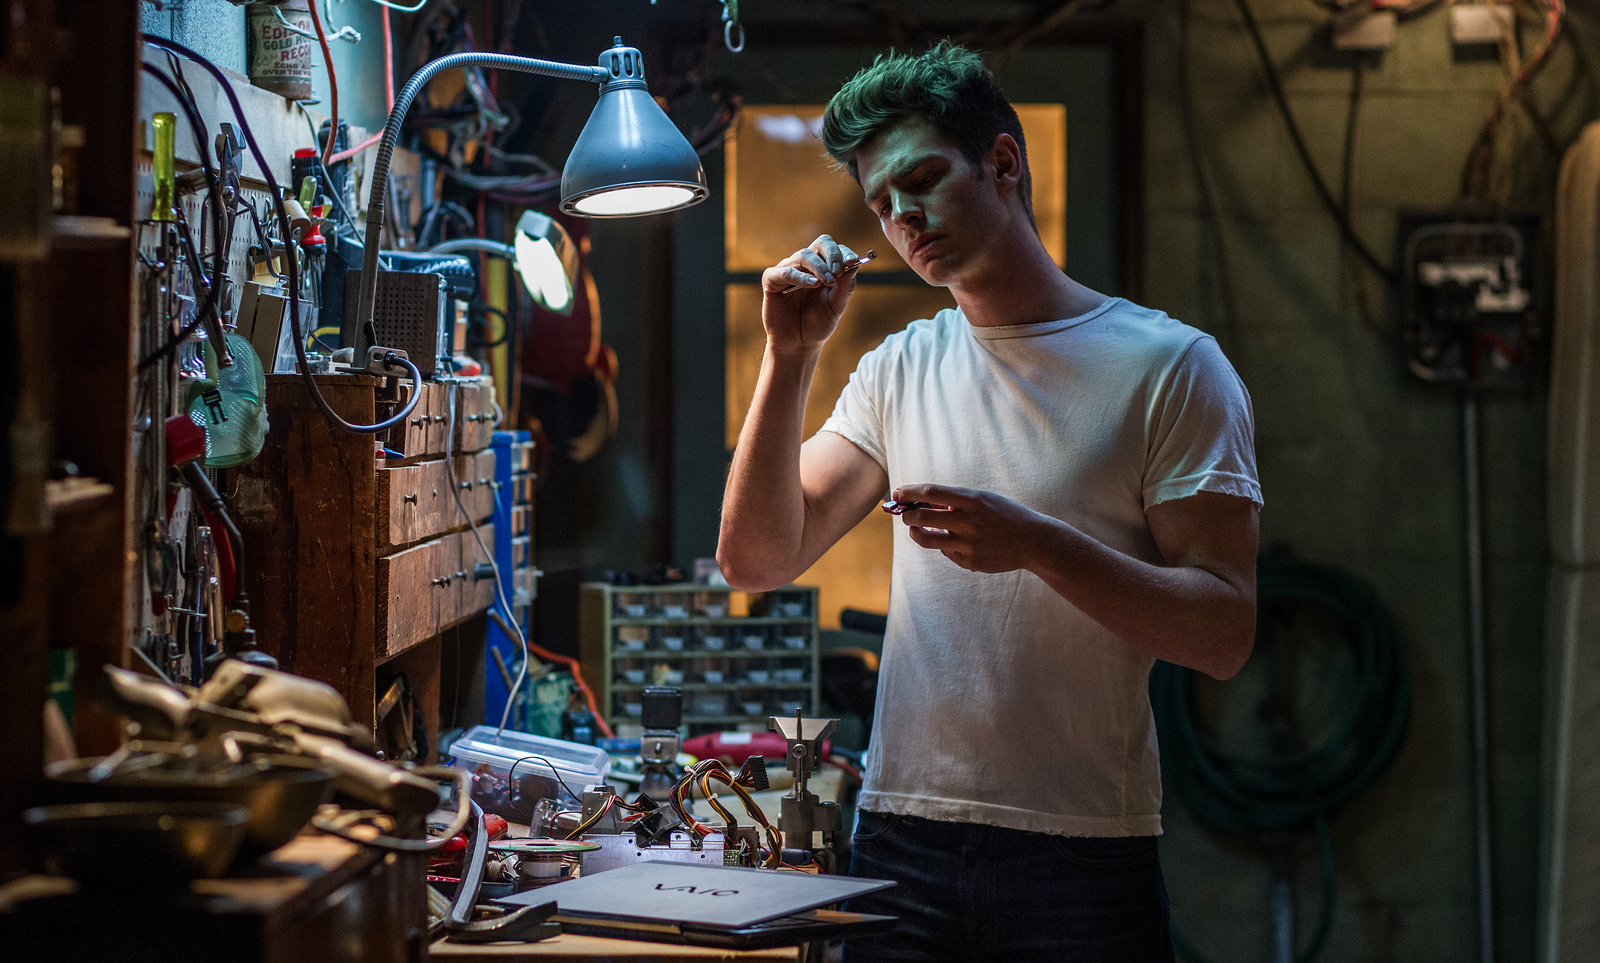 Andrew Garfield in The Amazing Spider-Man 2